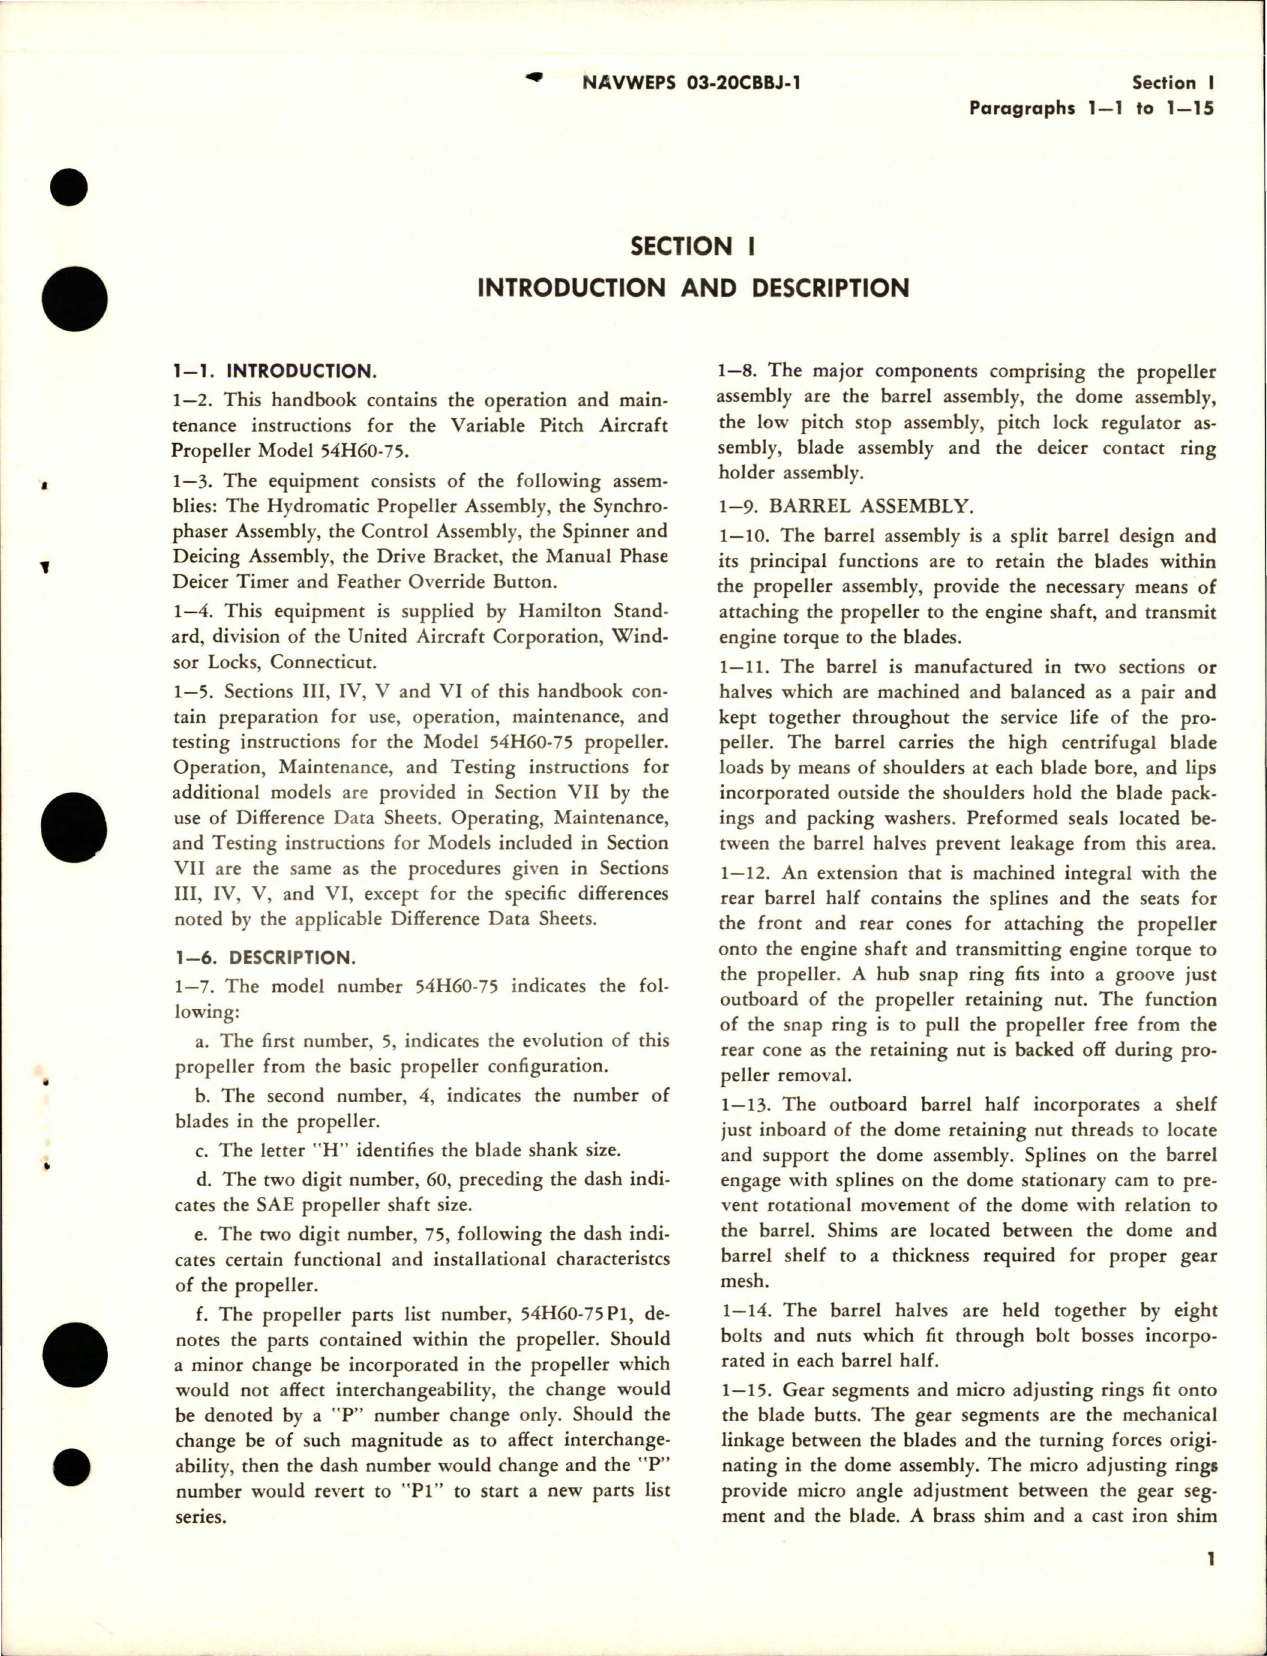 Sample page 5 from AirCorps Library document: Operation and Maintenance Instructions for Variable Pitch Propeller - Models 54H60-69, 54H60-73, and 54H60-75